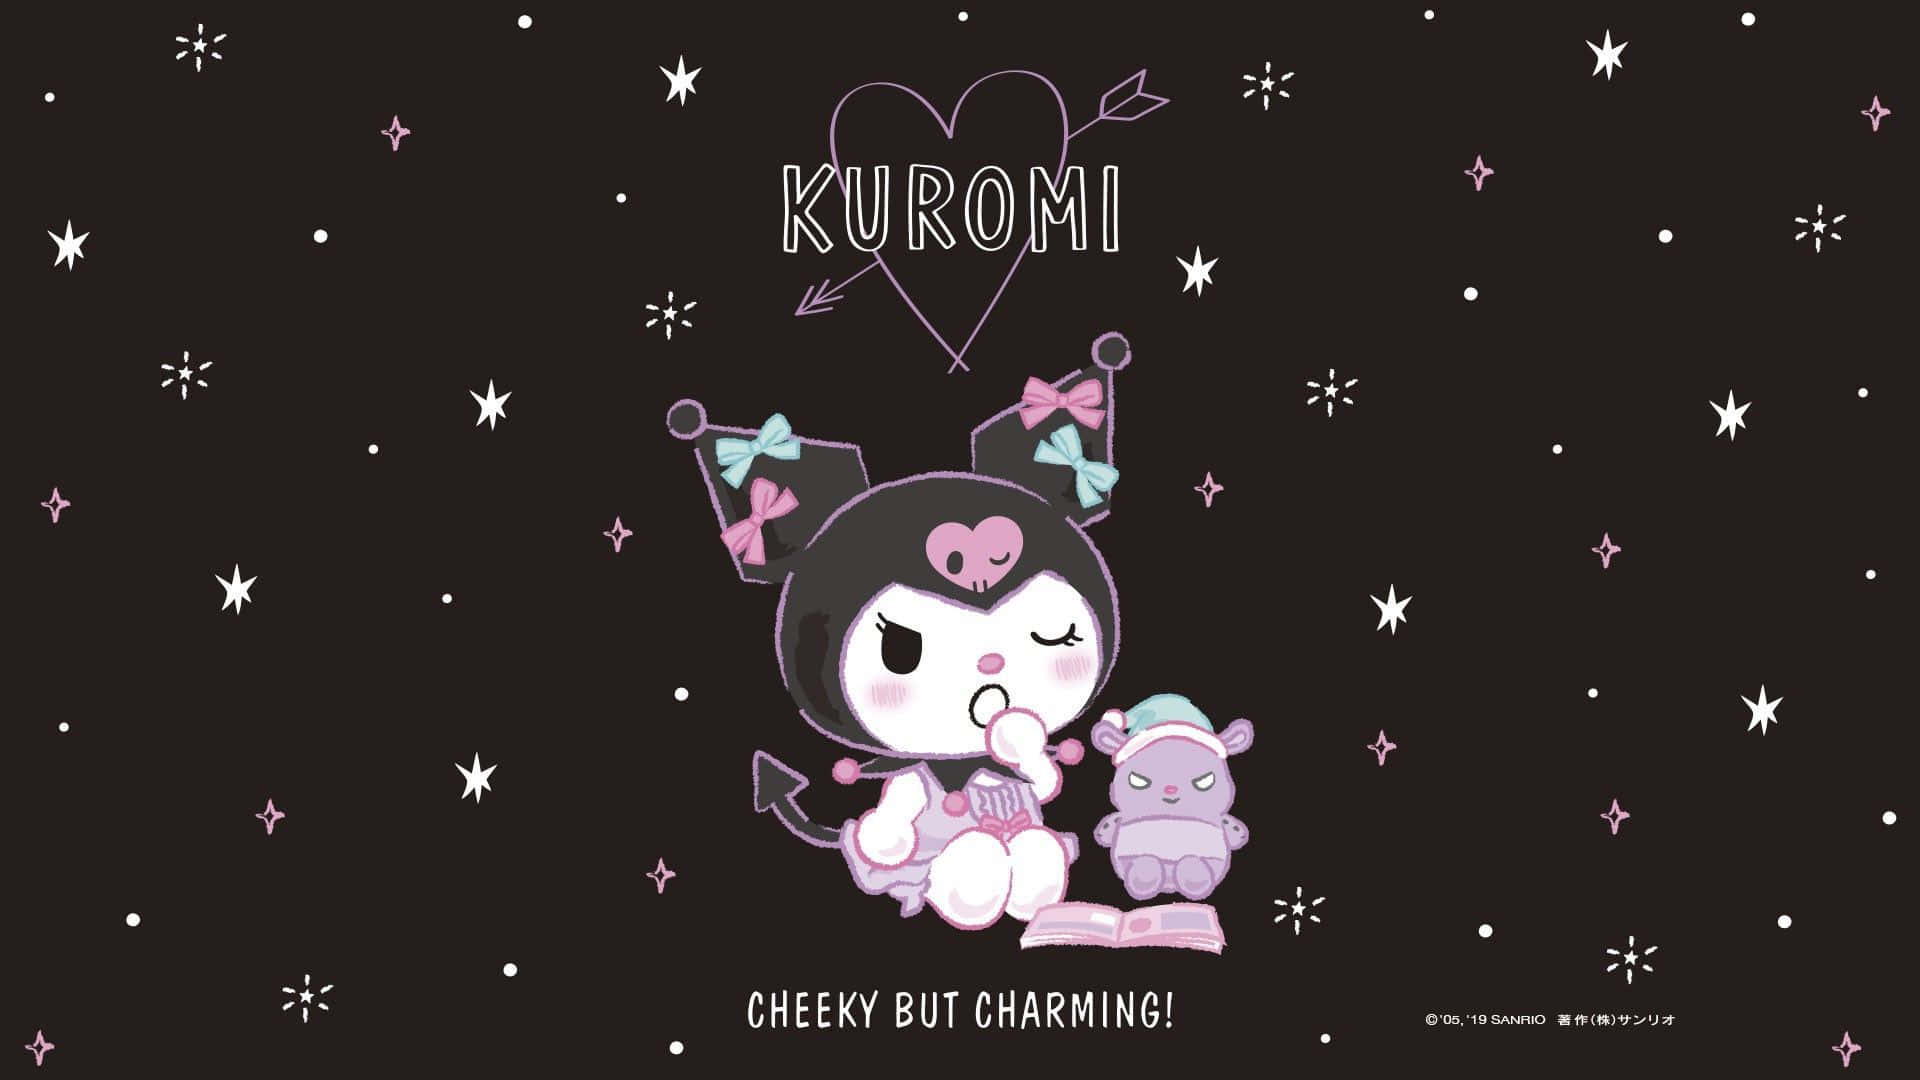 Show your style with Kuromi Aesthetic! Wallpaper